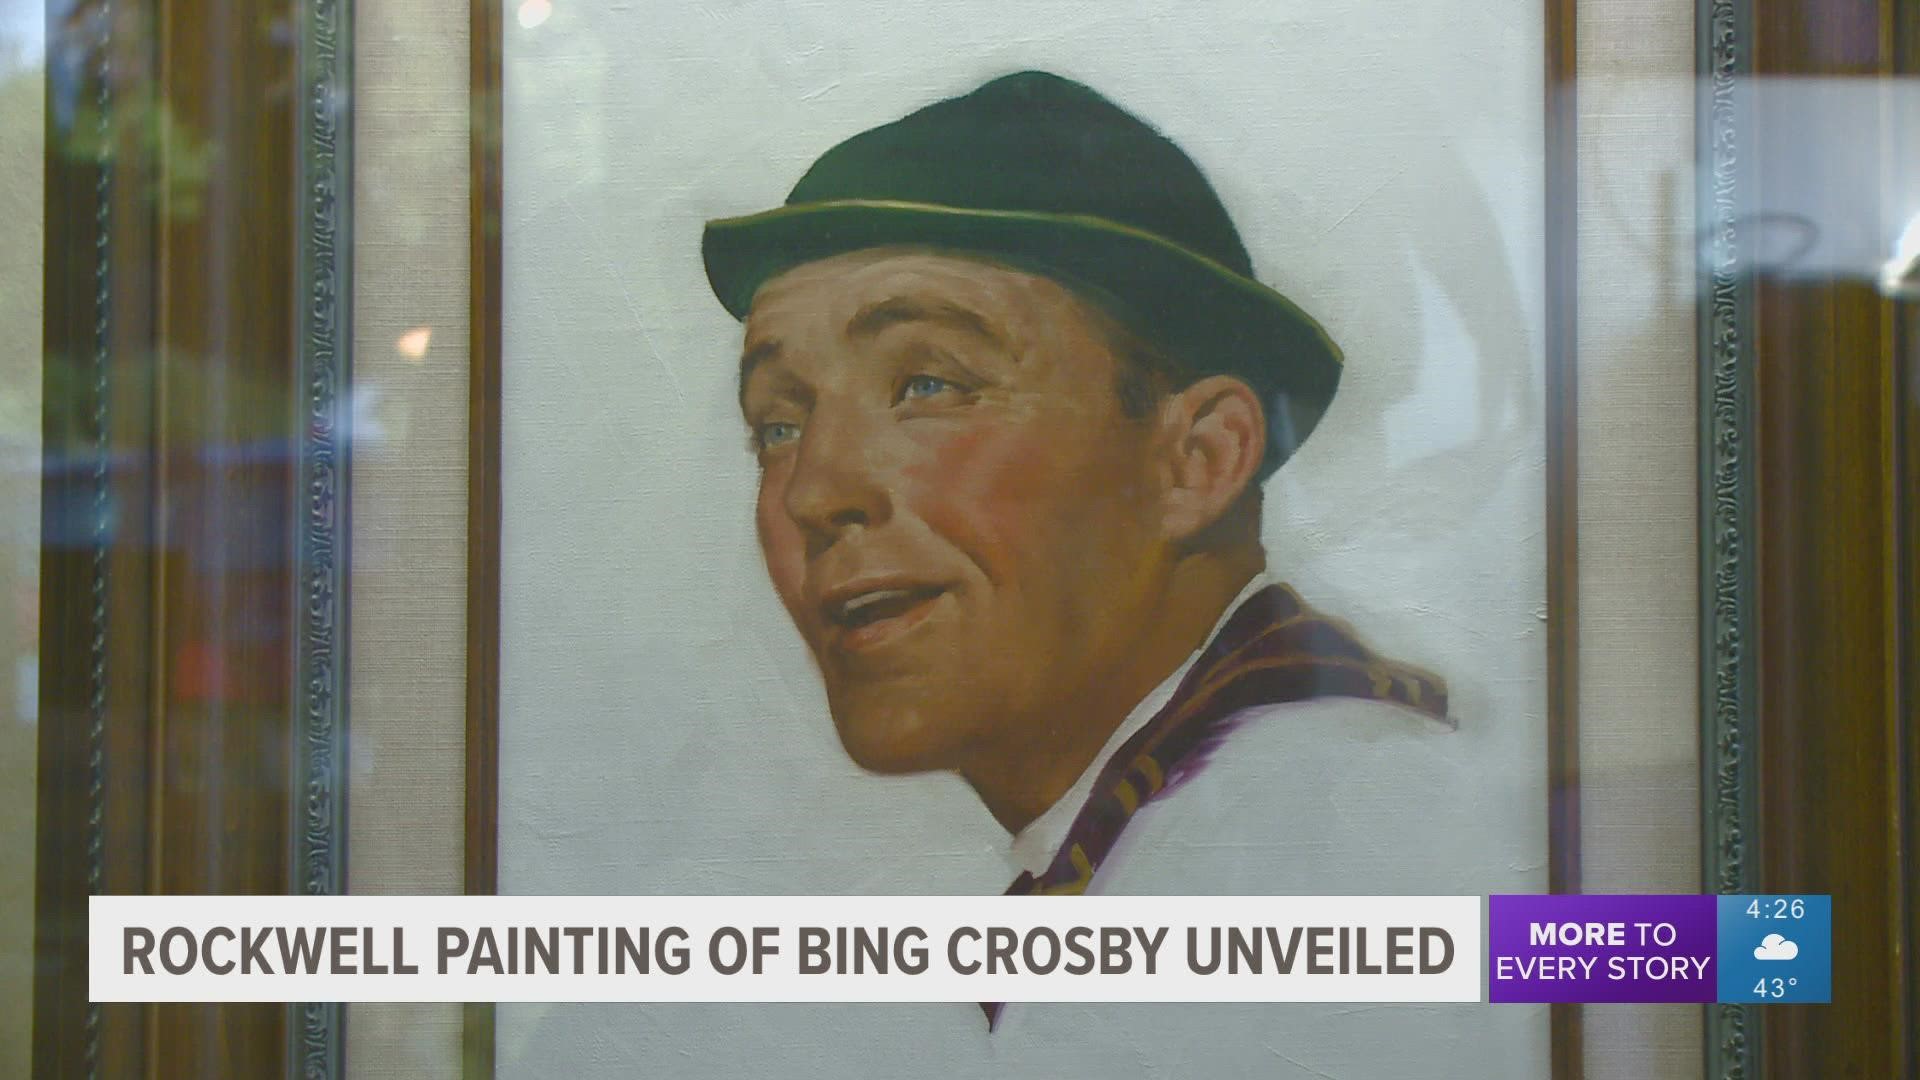 A Norman Rockwell painting of Bing Crosby was unveiled at the Bing Crosby Home Museum in Spokane.